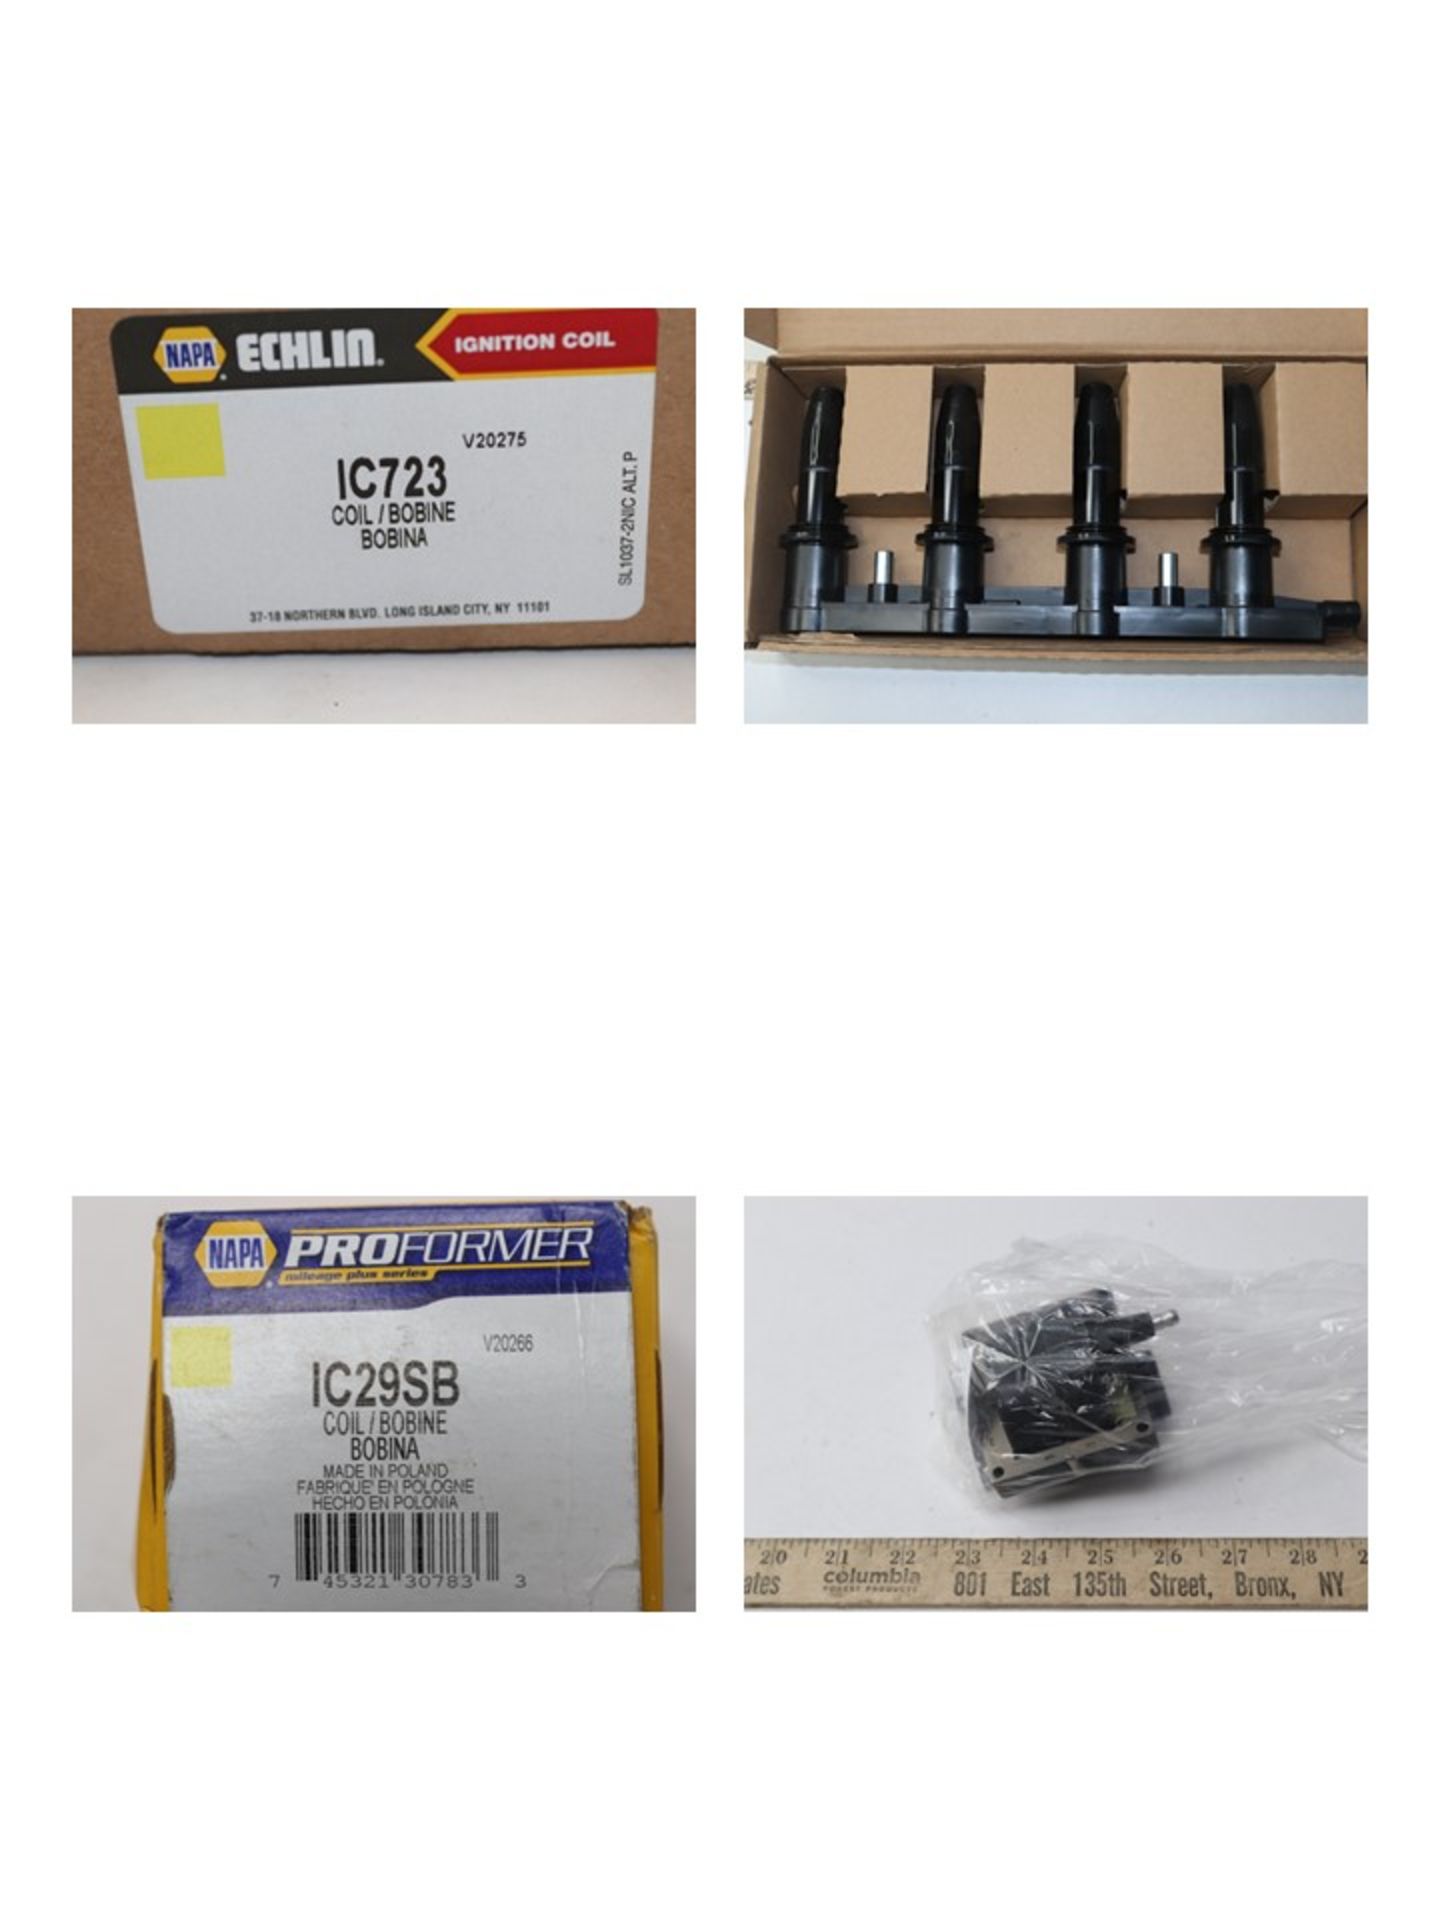 {LOT} 30k Retail Value of "NAPA AUTO PARTS" Items with 385 SKU's and 710+ Piece Quantity - Mostly - Image 94 of 113